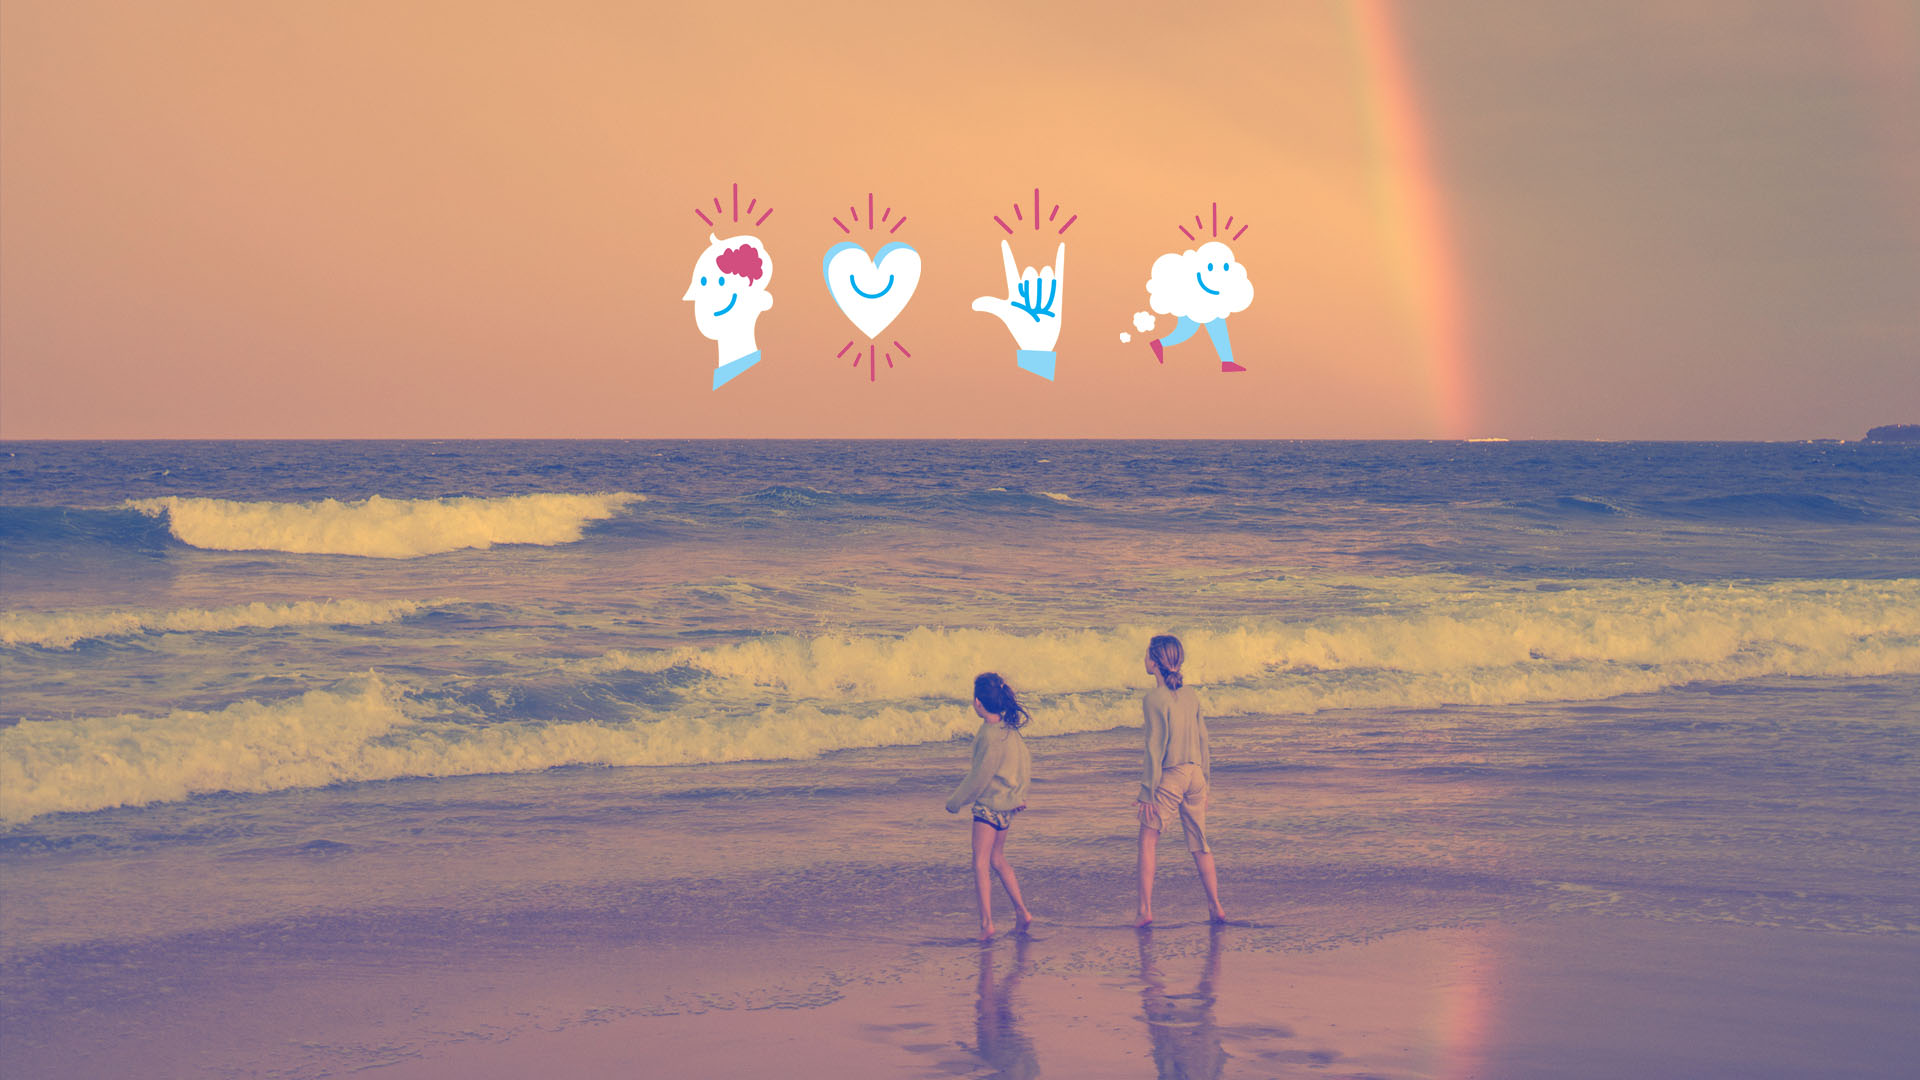 An image showing a beach with the 4 #thinkocean challenge shoal icons. 